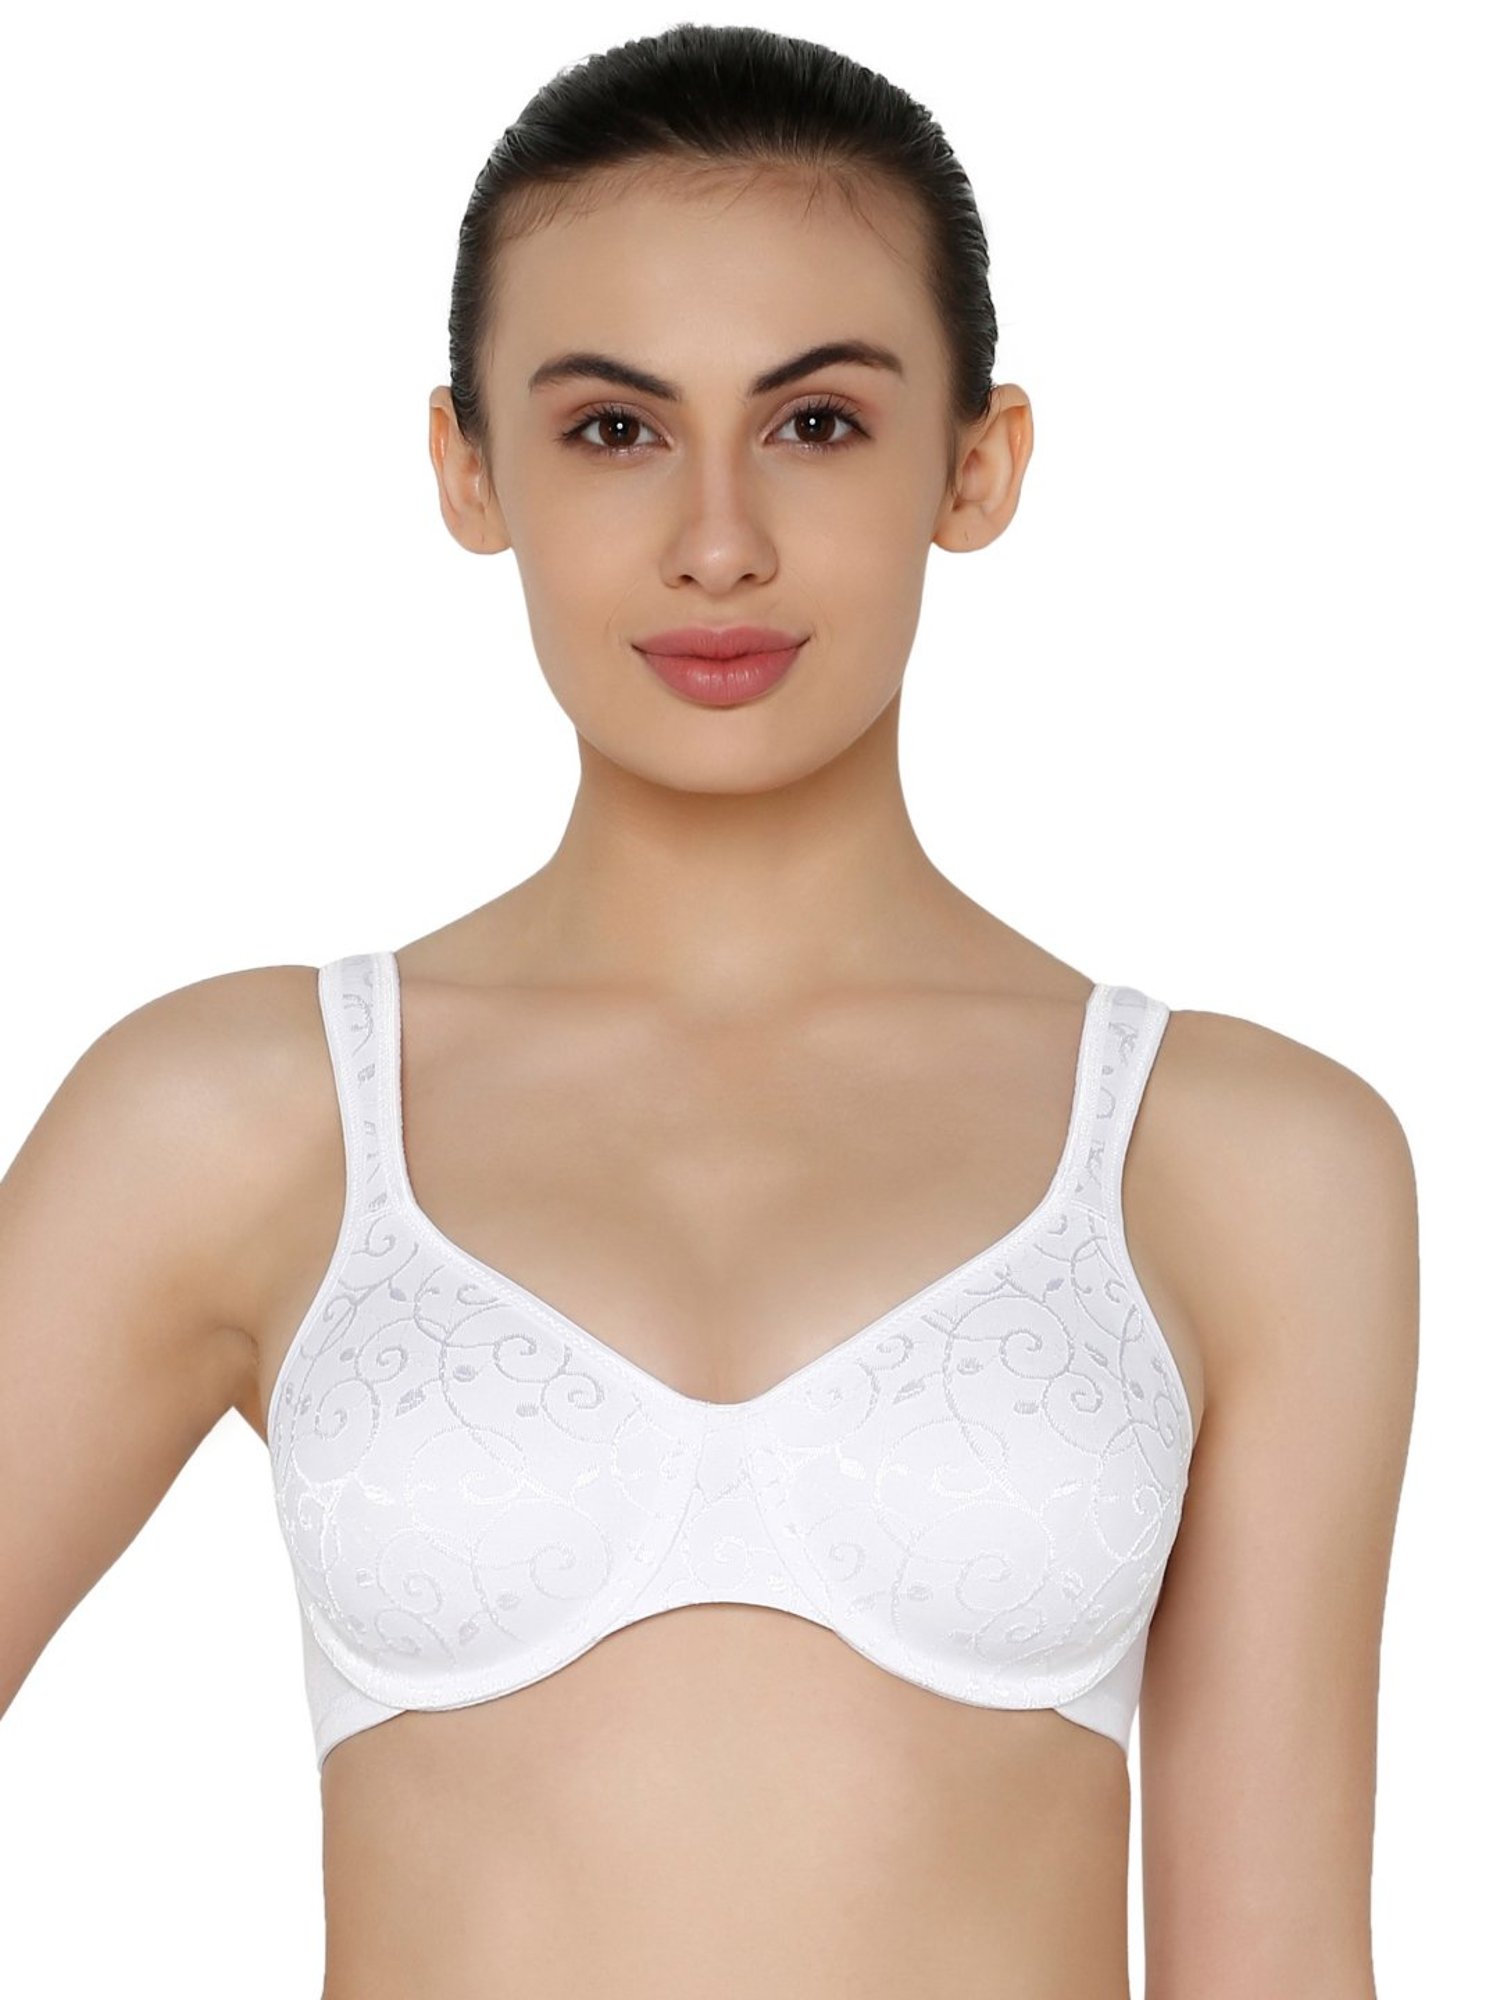  Triumph Elegant Cotton N Non Wired Full Cup Bra White (0003)  38D CS : Clothing, Shoes & Jewelry